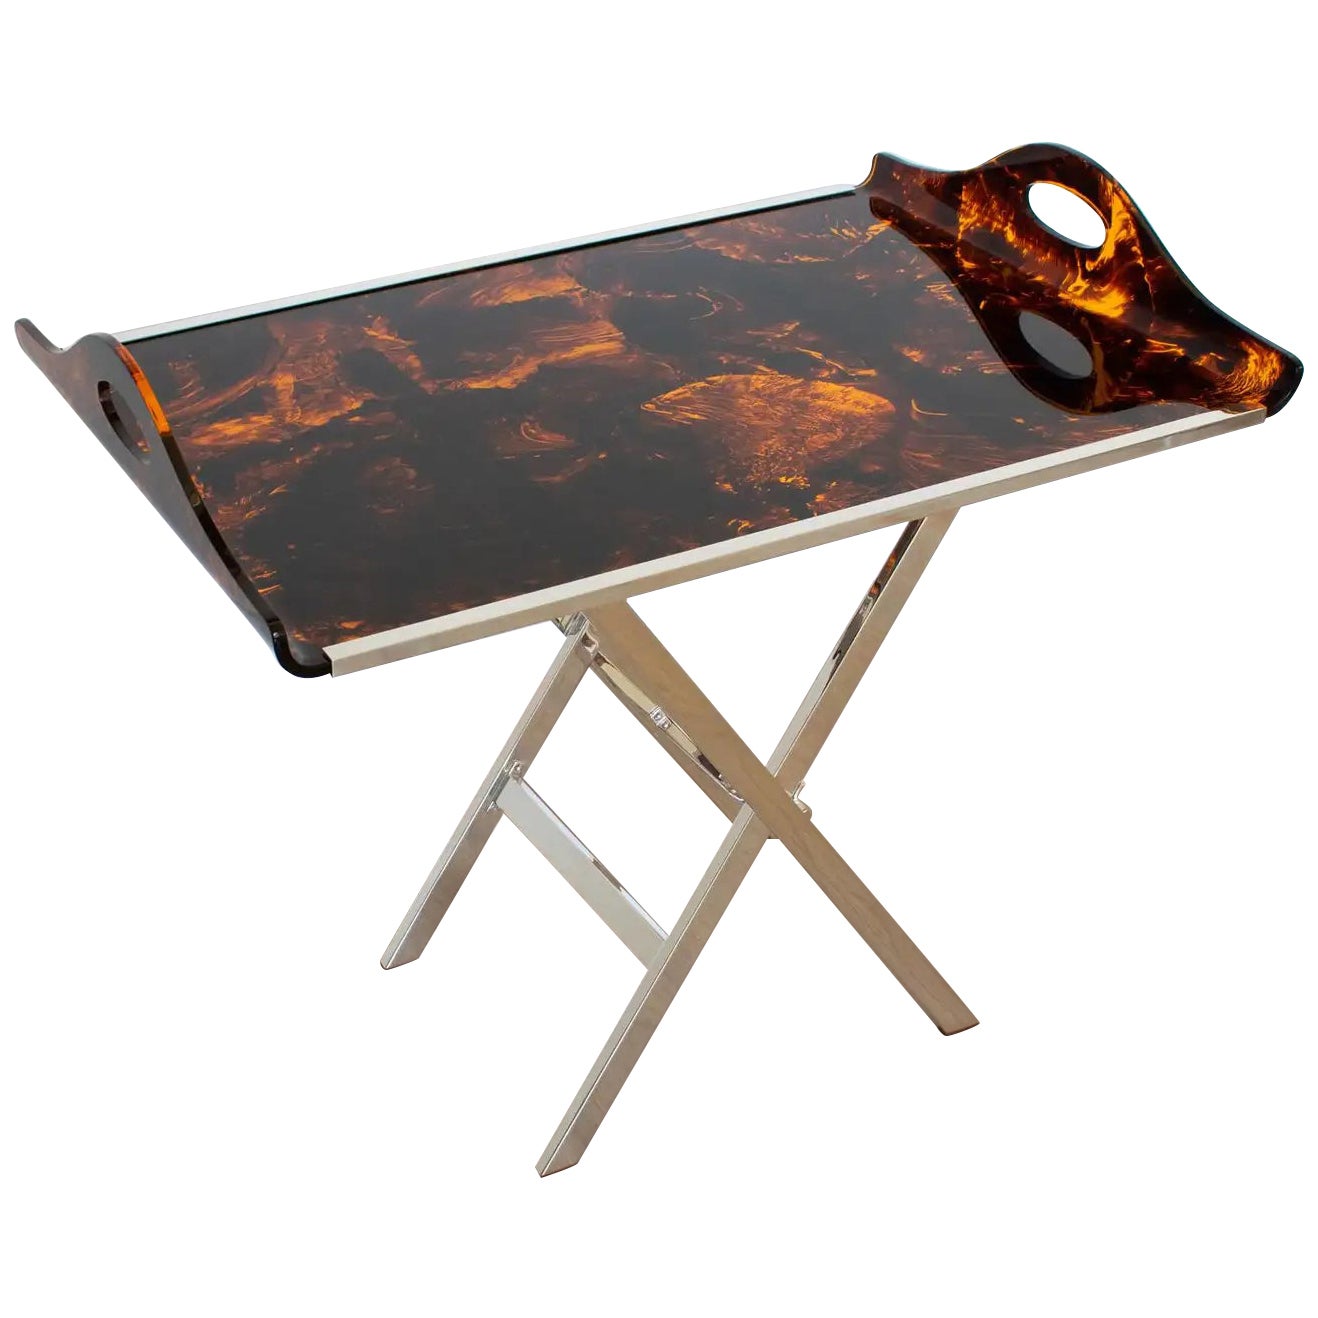 Christian Dior Folding Tray Table Tortoiseshell Lucite and Silver Plate, 1960s For Sale